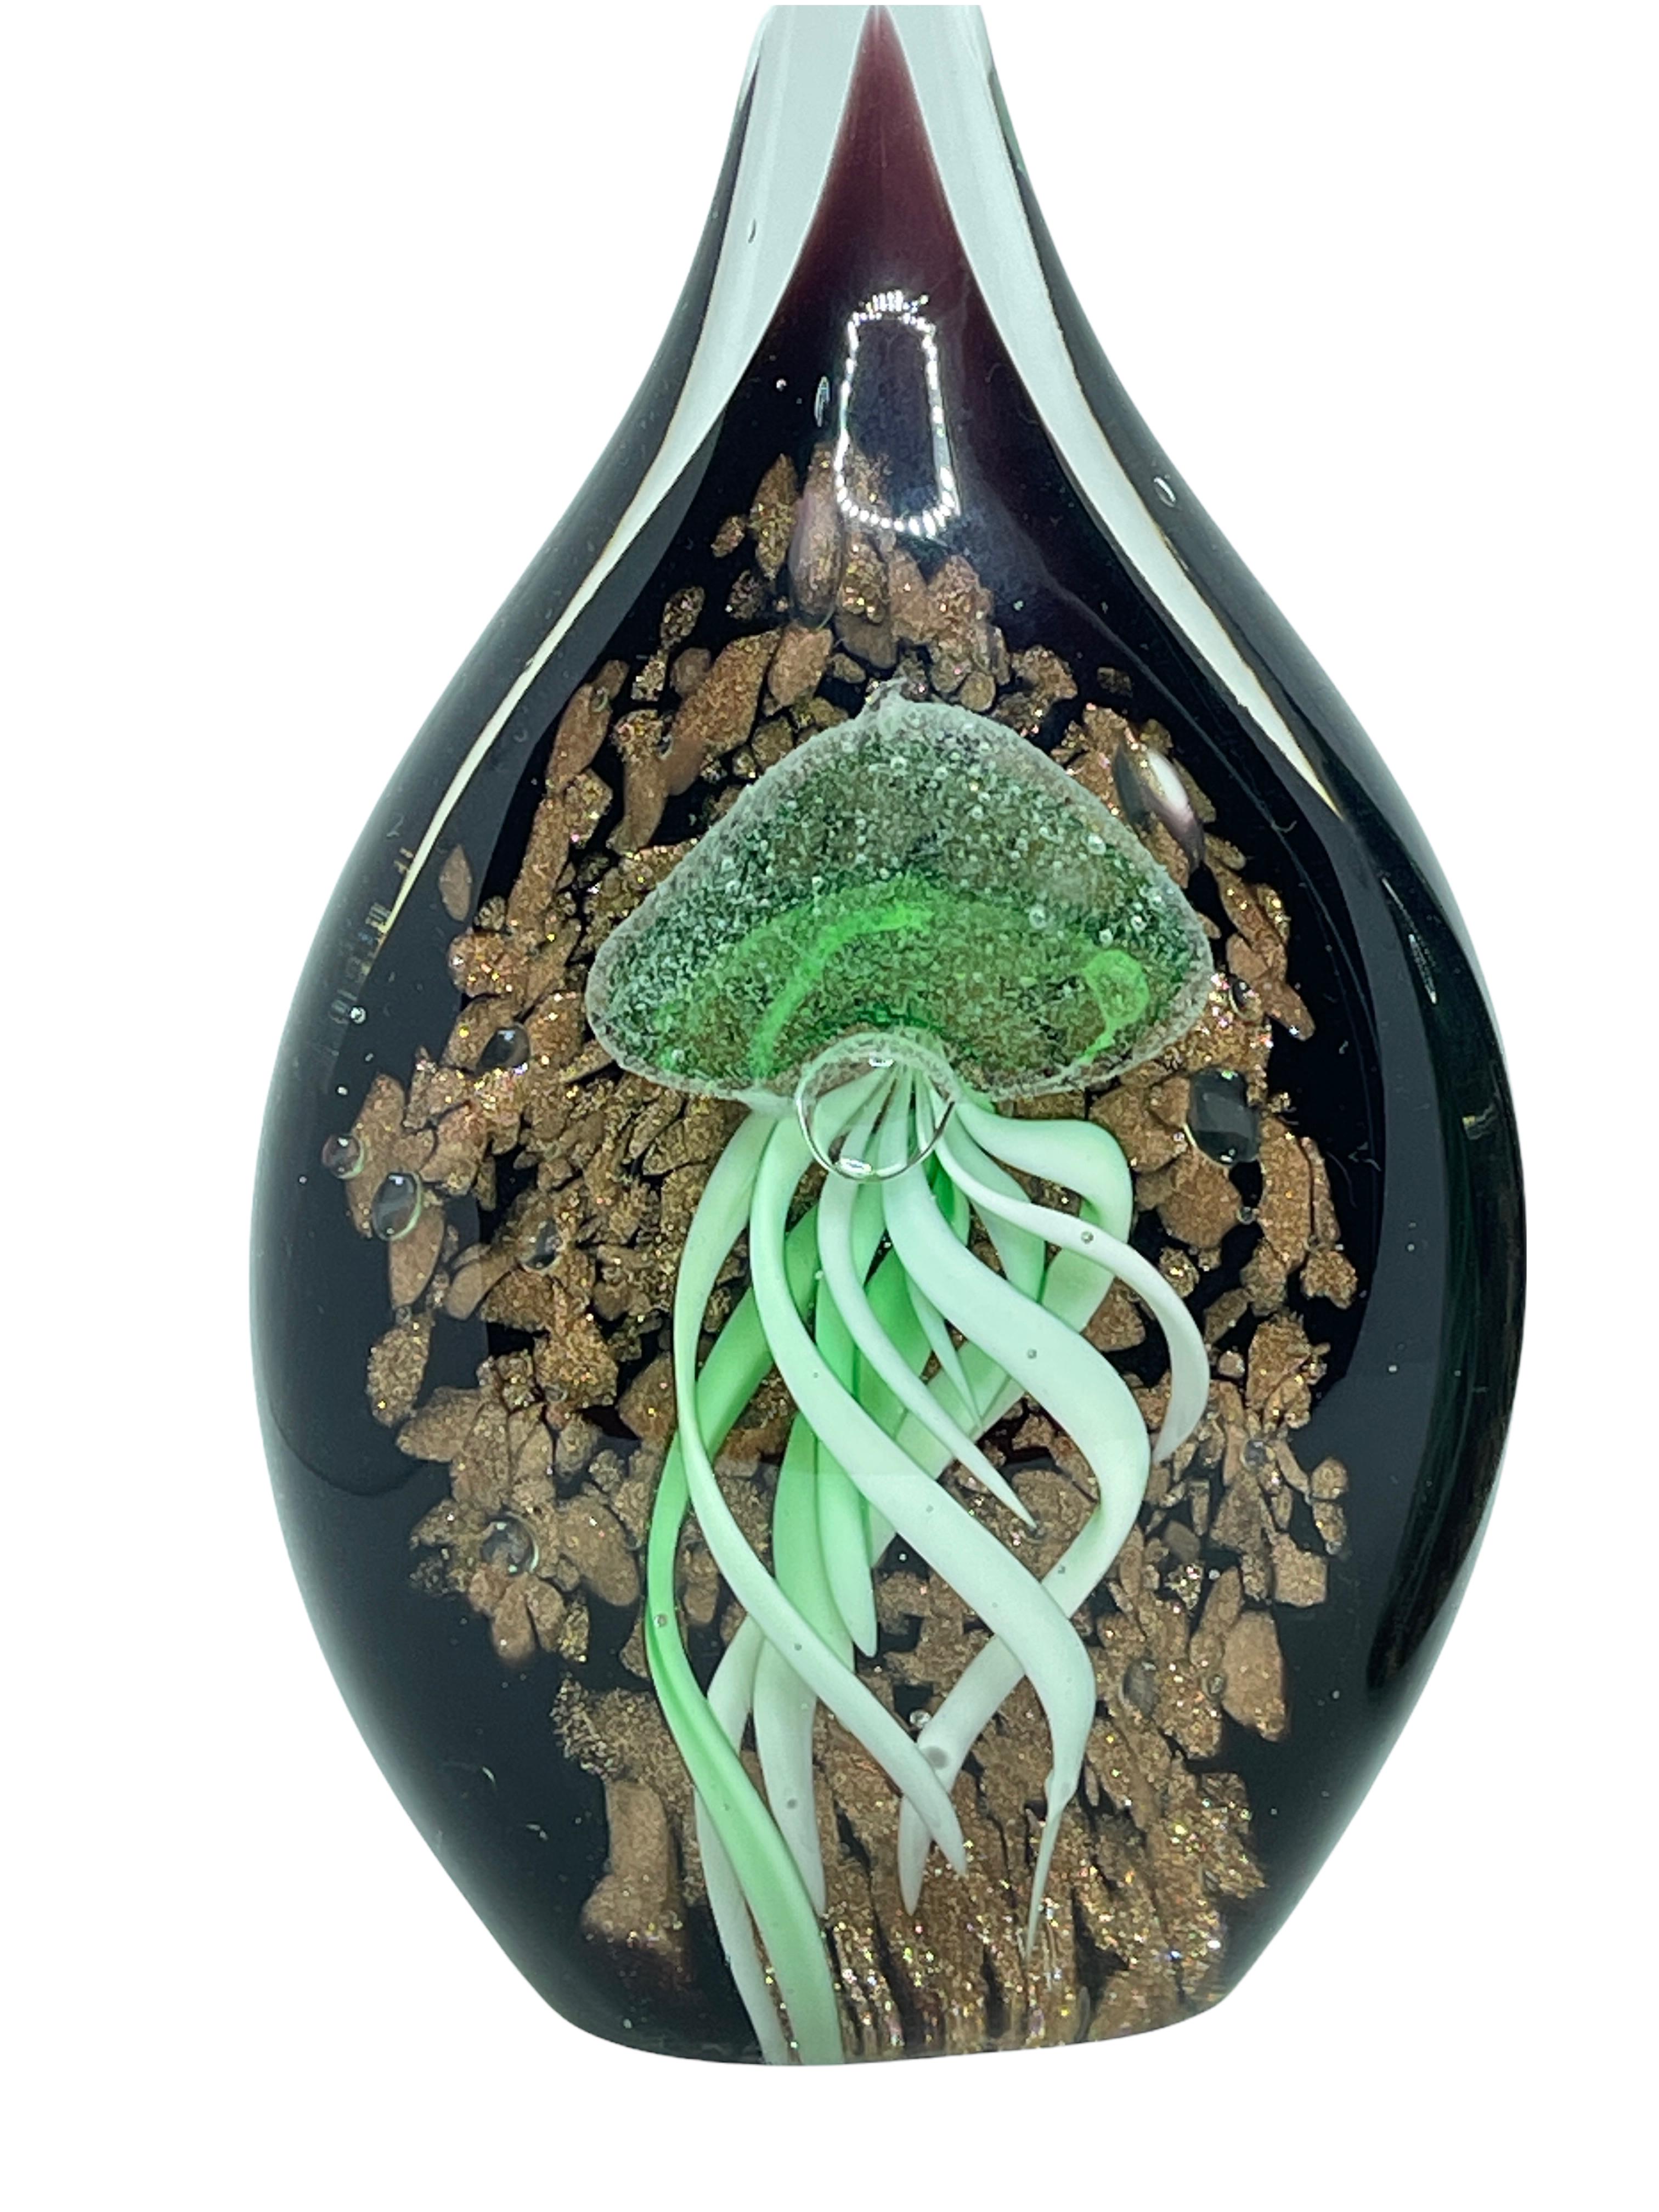 Beautiful Murano hand blown aquarium Italian art glass Statue or paperweight. Each Showing a jelly fish, underwater floating on controlled bubbles. Colors are a black, green and clear. A beautiful nice addition to your desktop or as a decorative